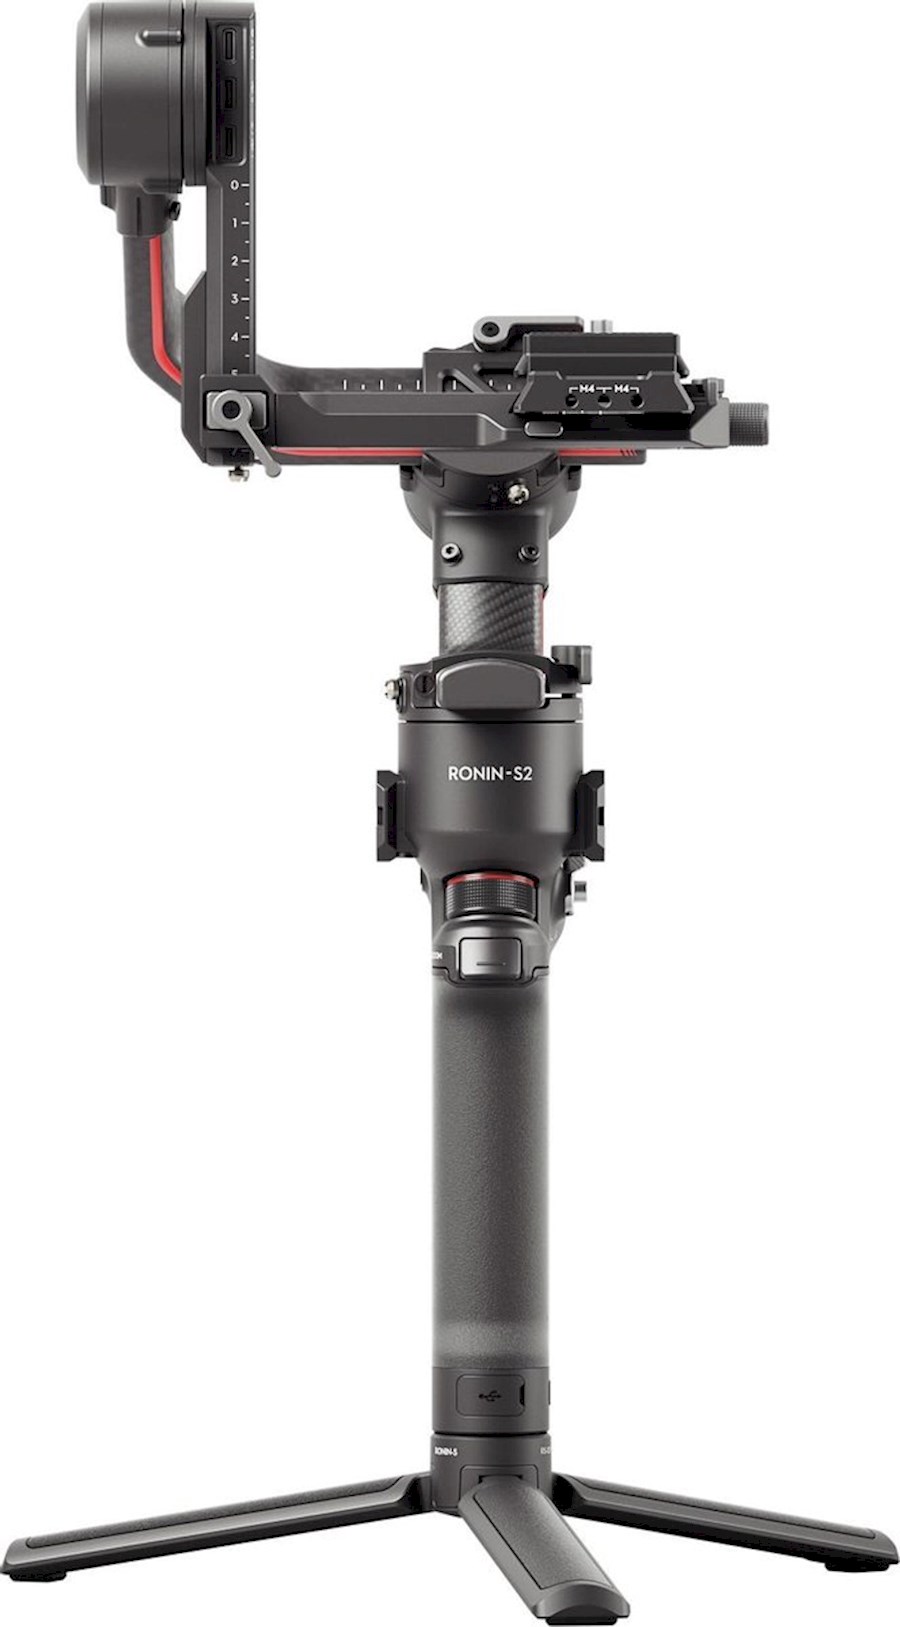 Rent DJI Ronin S2 Gimbal + ... from V.O.F. AFH-FILM